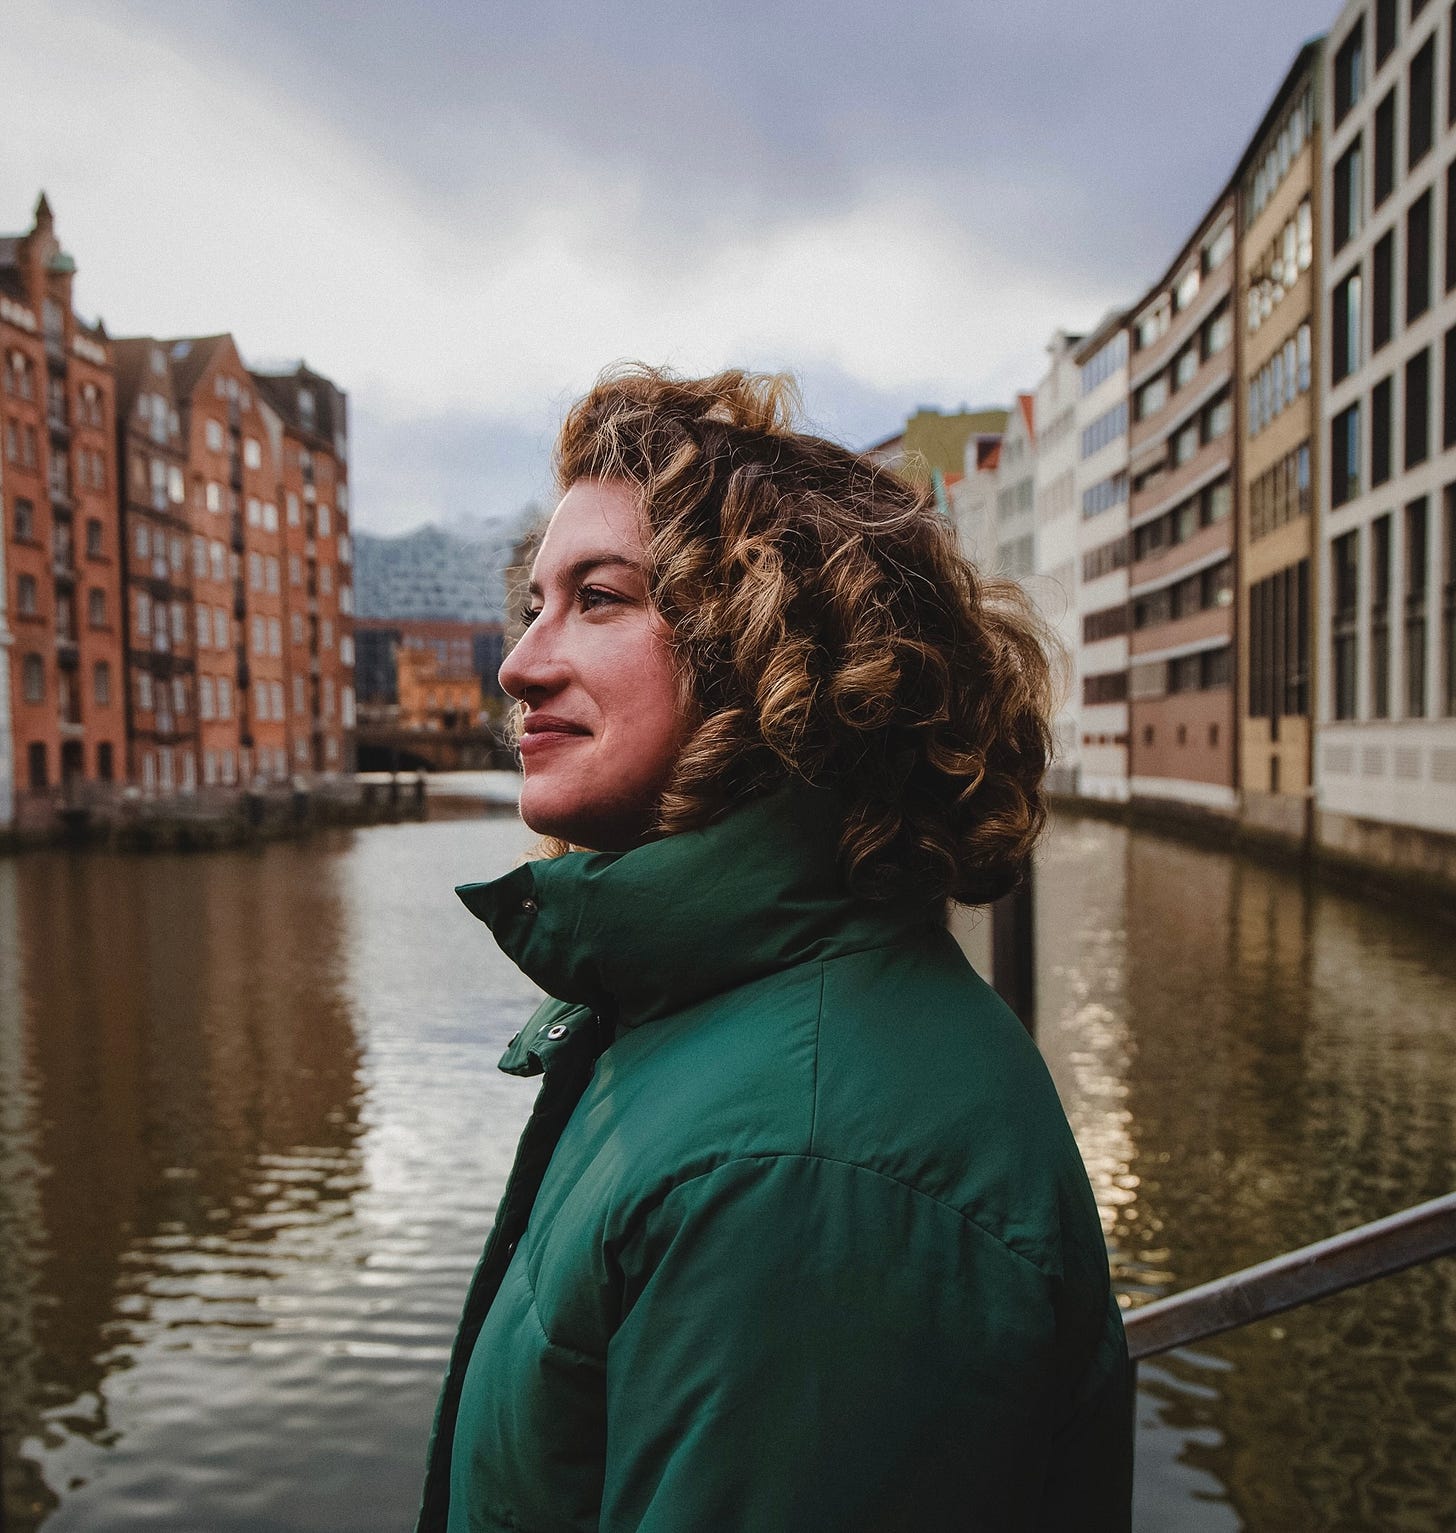 Maeve standing in the Speicherstadt district of Hamburg, looking off in the distance